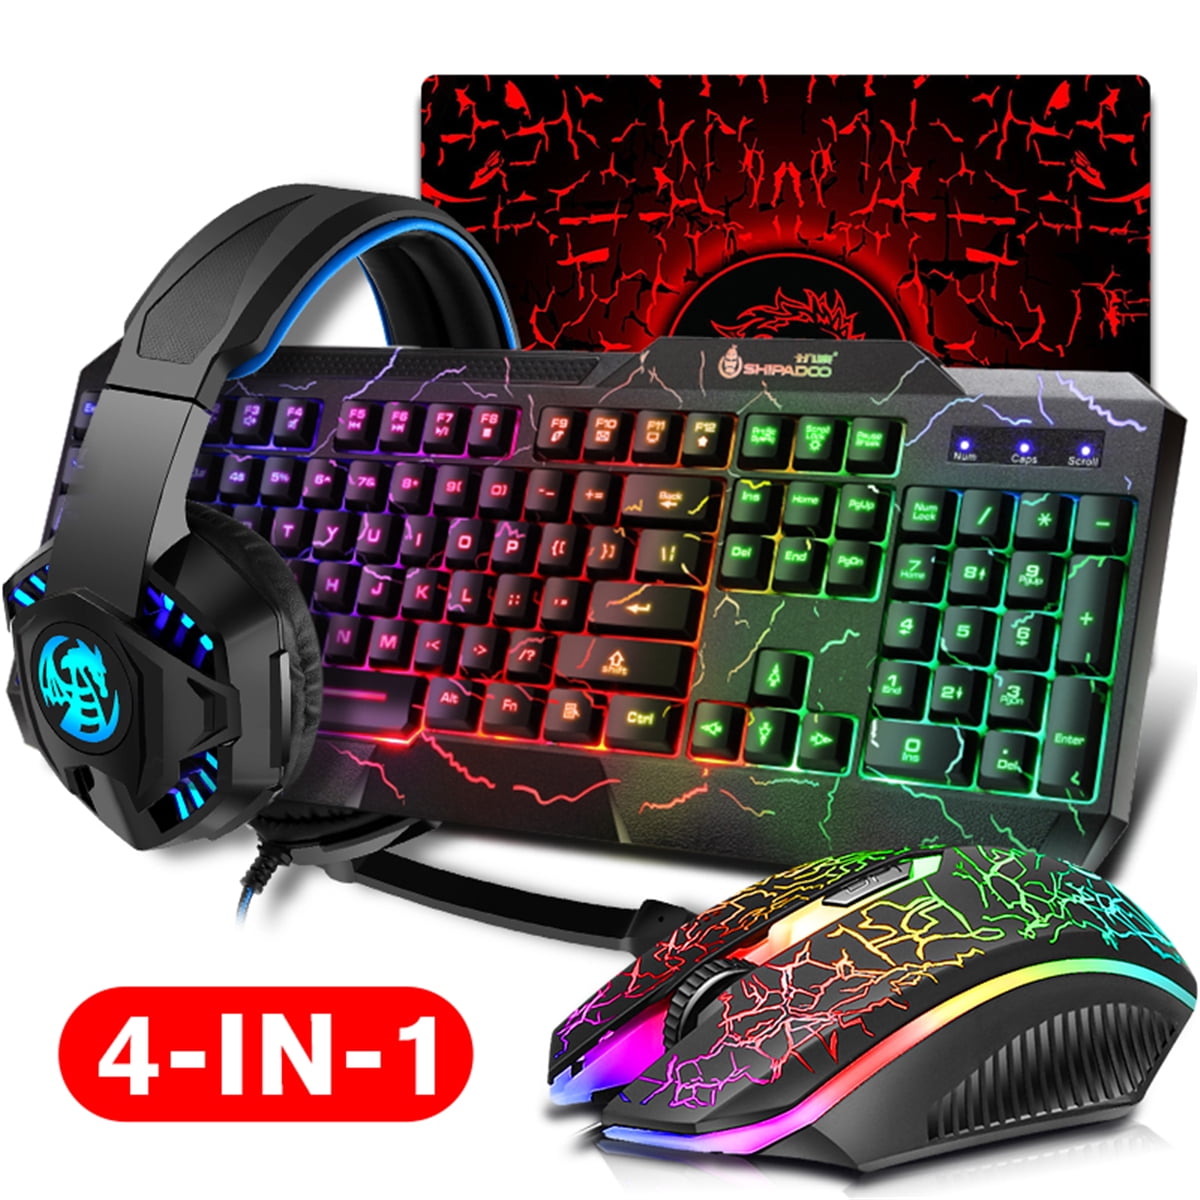 4 in 1 Gaming Keyboard and Mouse and Mouse pad and Gaming Headset, LED RGB Backlight Bundle for Gamers and and for PS4 Users Birthday Christmas Gifts Walmart.com